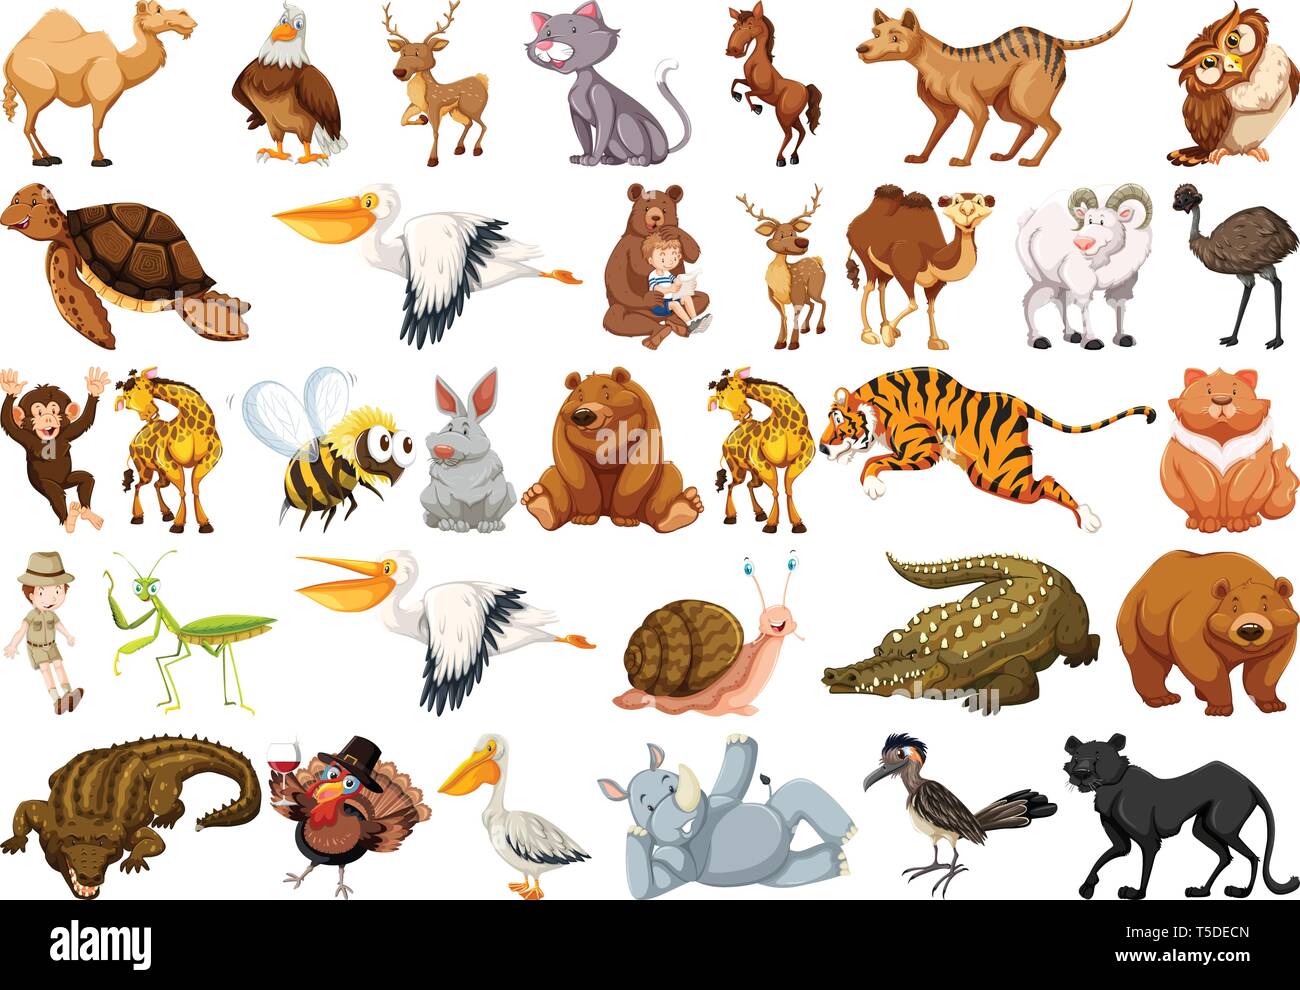 wild animals pictures and their names